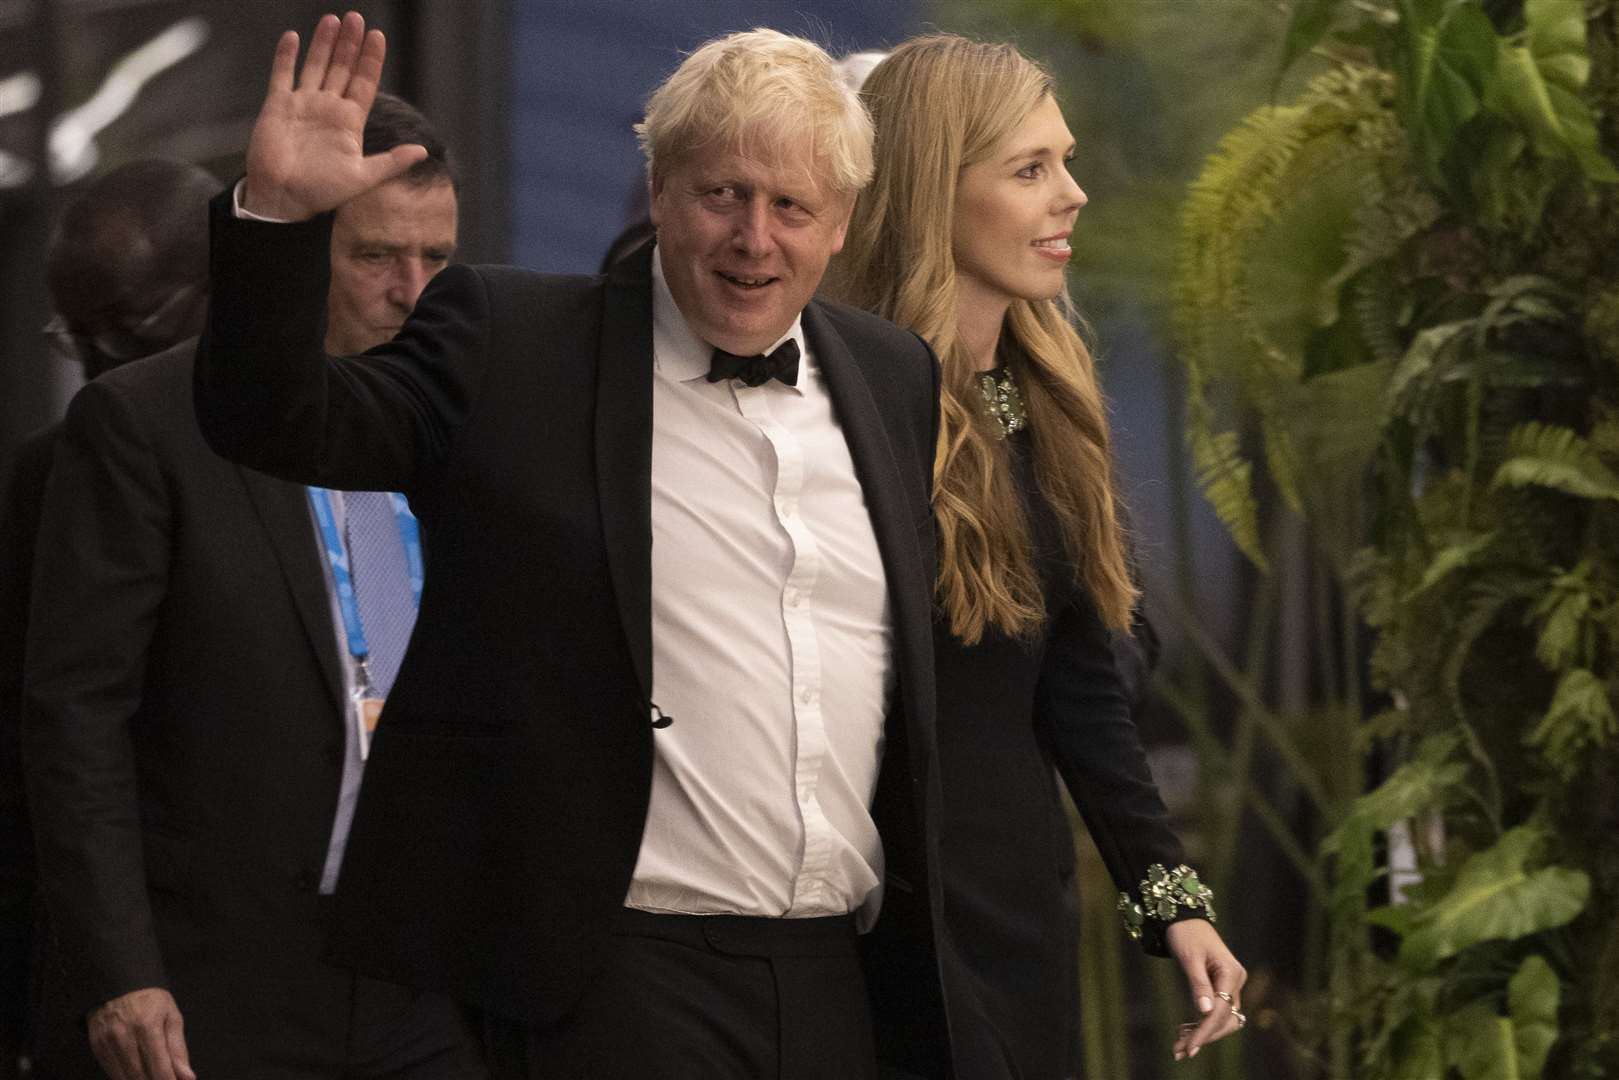 Boris Johnson allegedly suggested securing his now-wife a role as green ambassador in the run-up to Cop26 or as communications director for the Duke and Duchess of Cambridge’s Earthshot Prize (Dan Kitwood/PA)